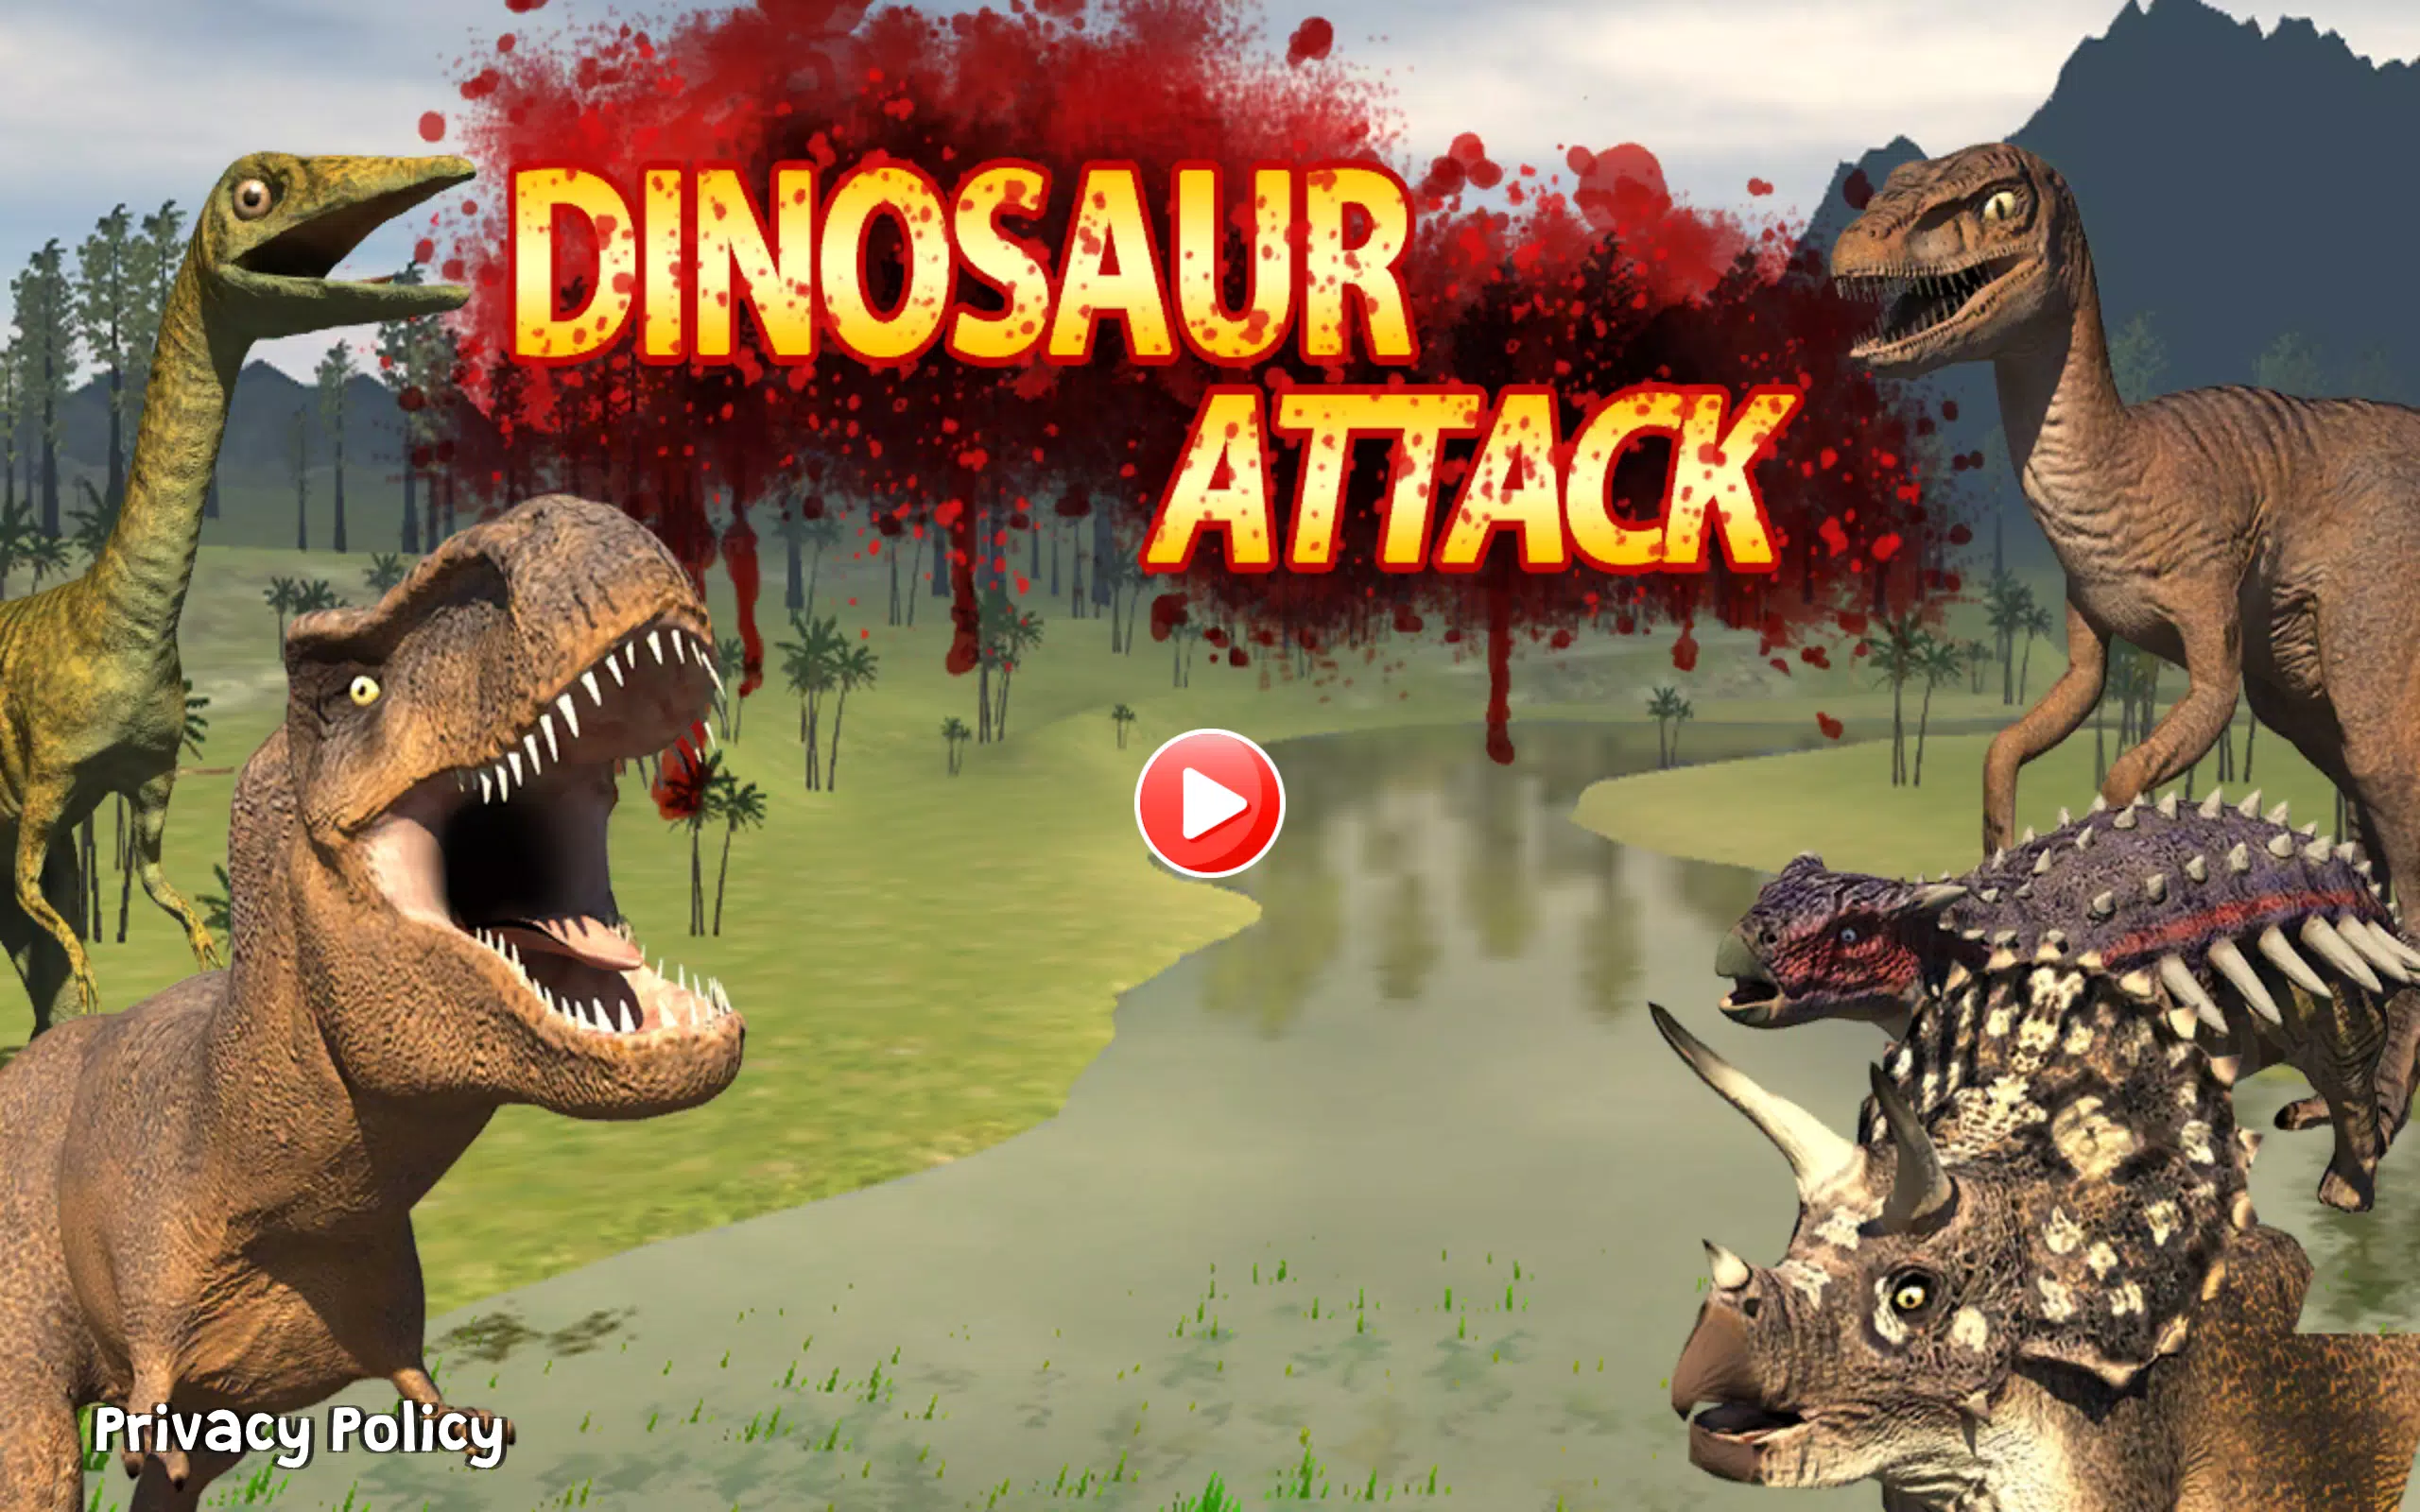 Dinosaurs Cards - Dino Game Apk Download for Android- Latest version 4.81-  dinosaur.app.star